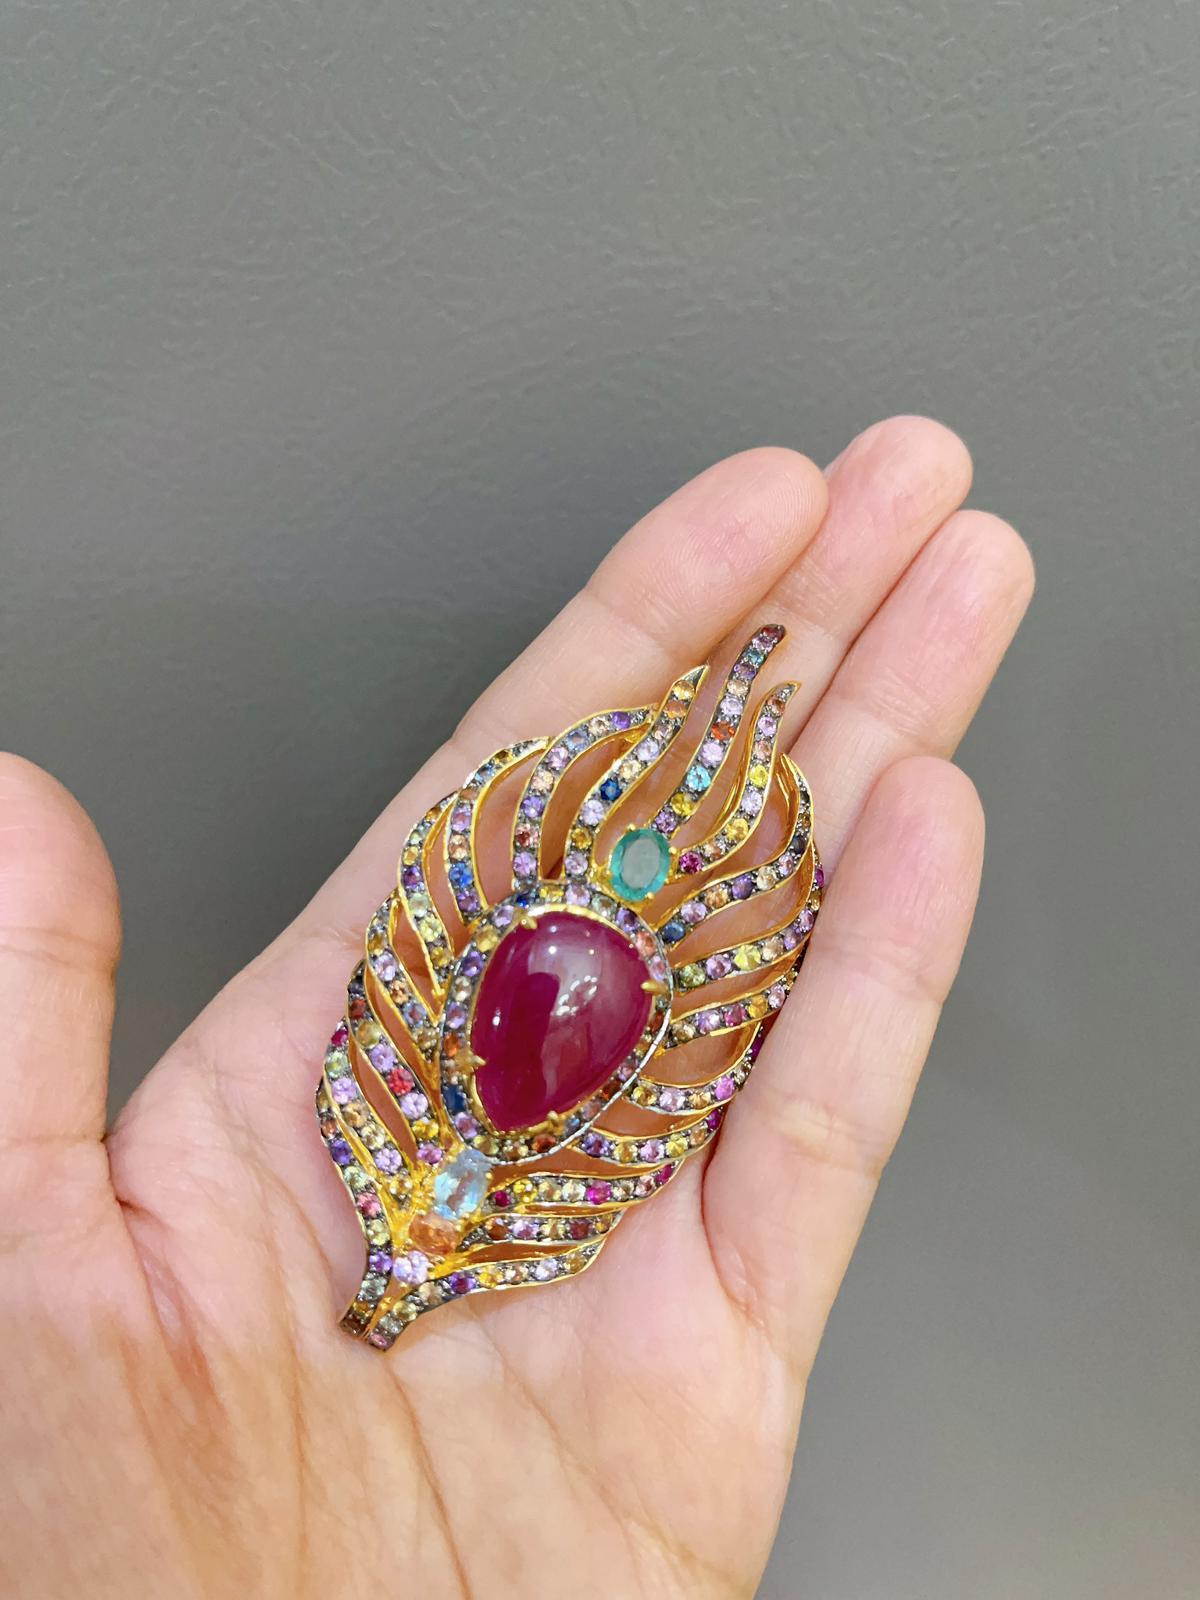 Bochic Multi Natural Gem Brooch 
Natural Ruby, Colors - Red, 12 Carats 
Natural Multi color Sri Lankan sapphires - 9 Carats 
Sapphire colors:
Green, yellow, pink, orange, blue and rose 
Round brilliant 
Natural Green Emerald - 1 Carat 
Oval shape -